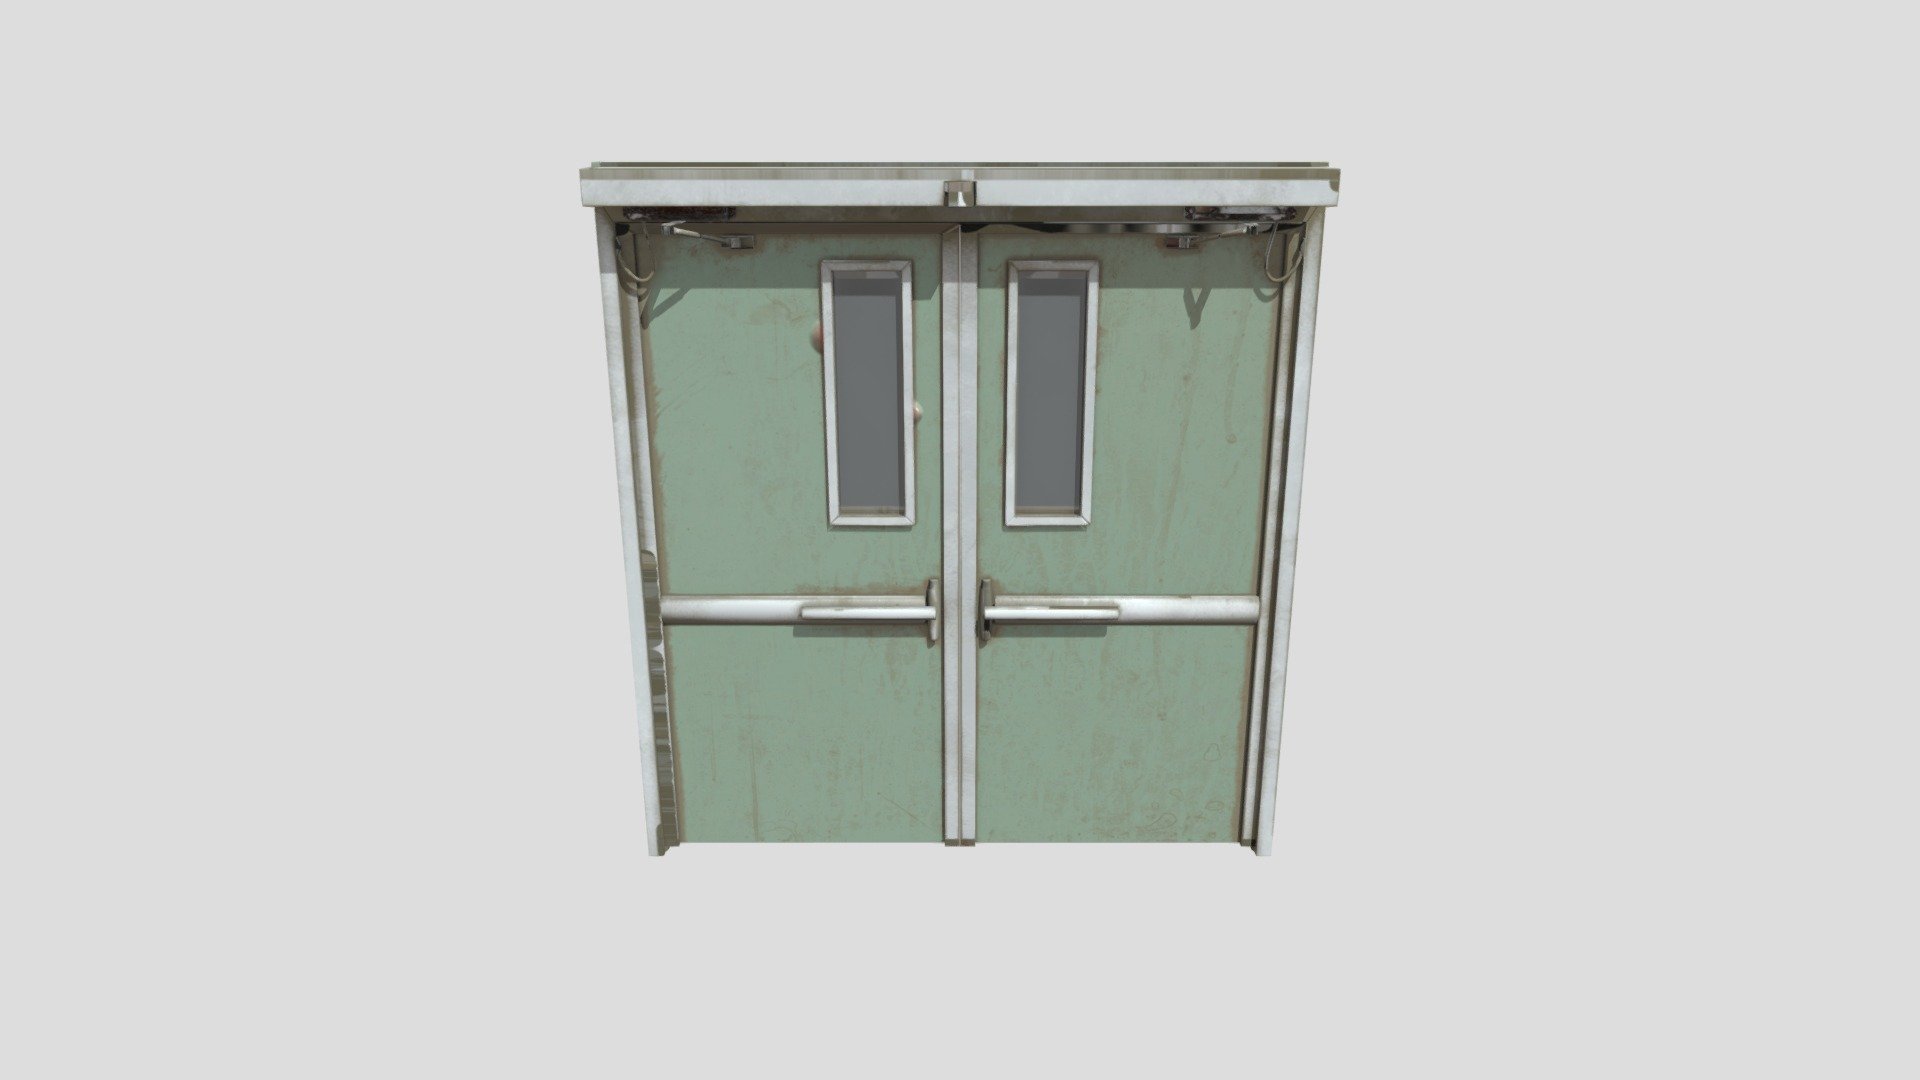 Hight quality Hospital door .
this is my first project using Substance painter i hope you enjoy it  :) - hospitalDoor Double swing - Download Free 3D model by azizcharfeddine1997 3d model